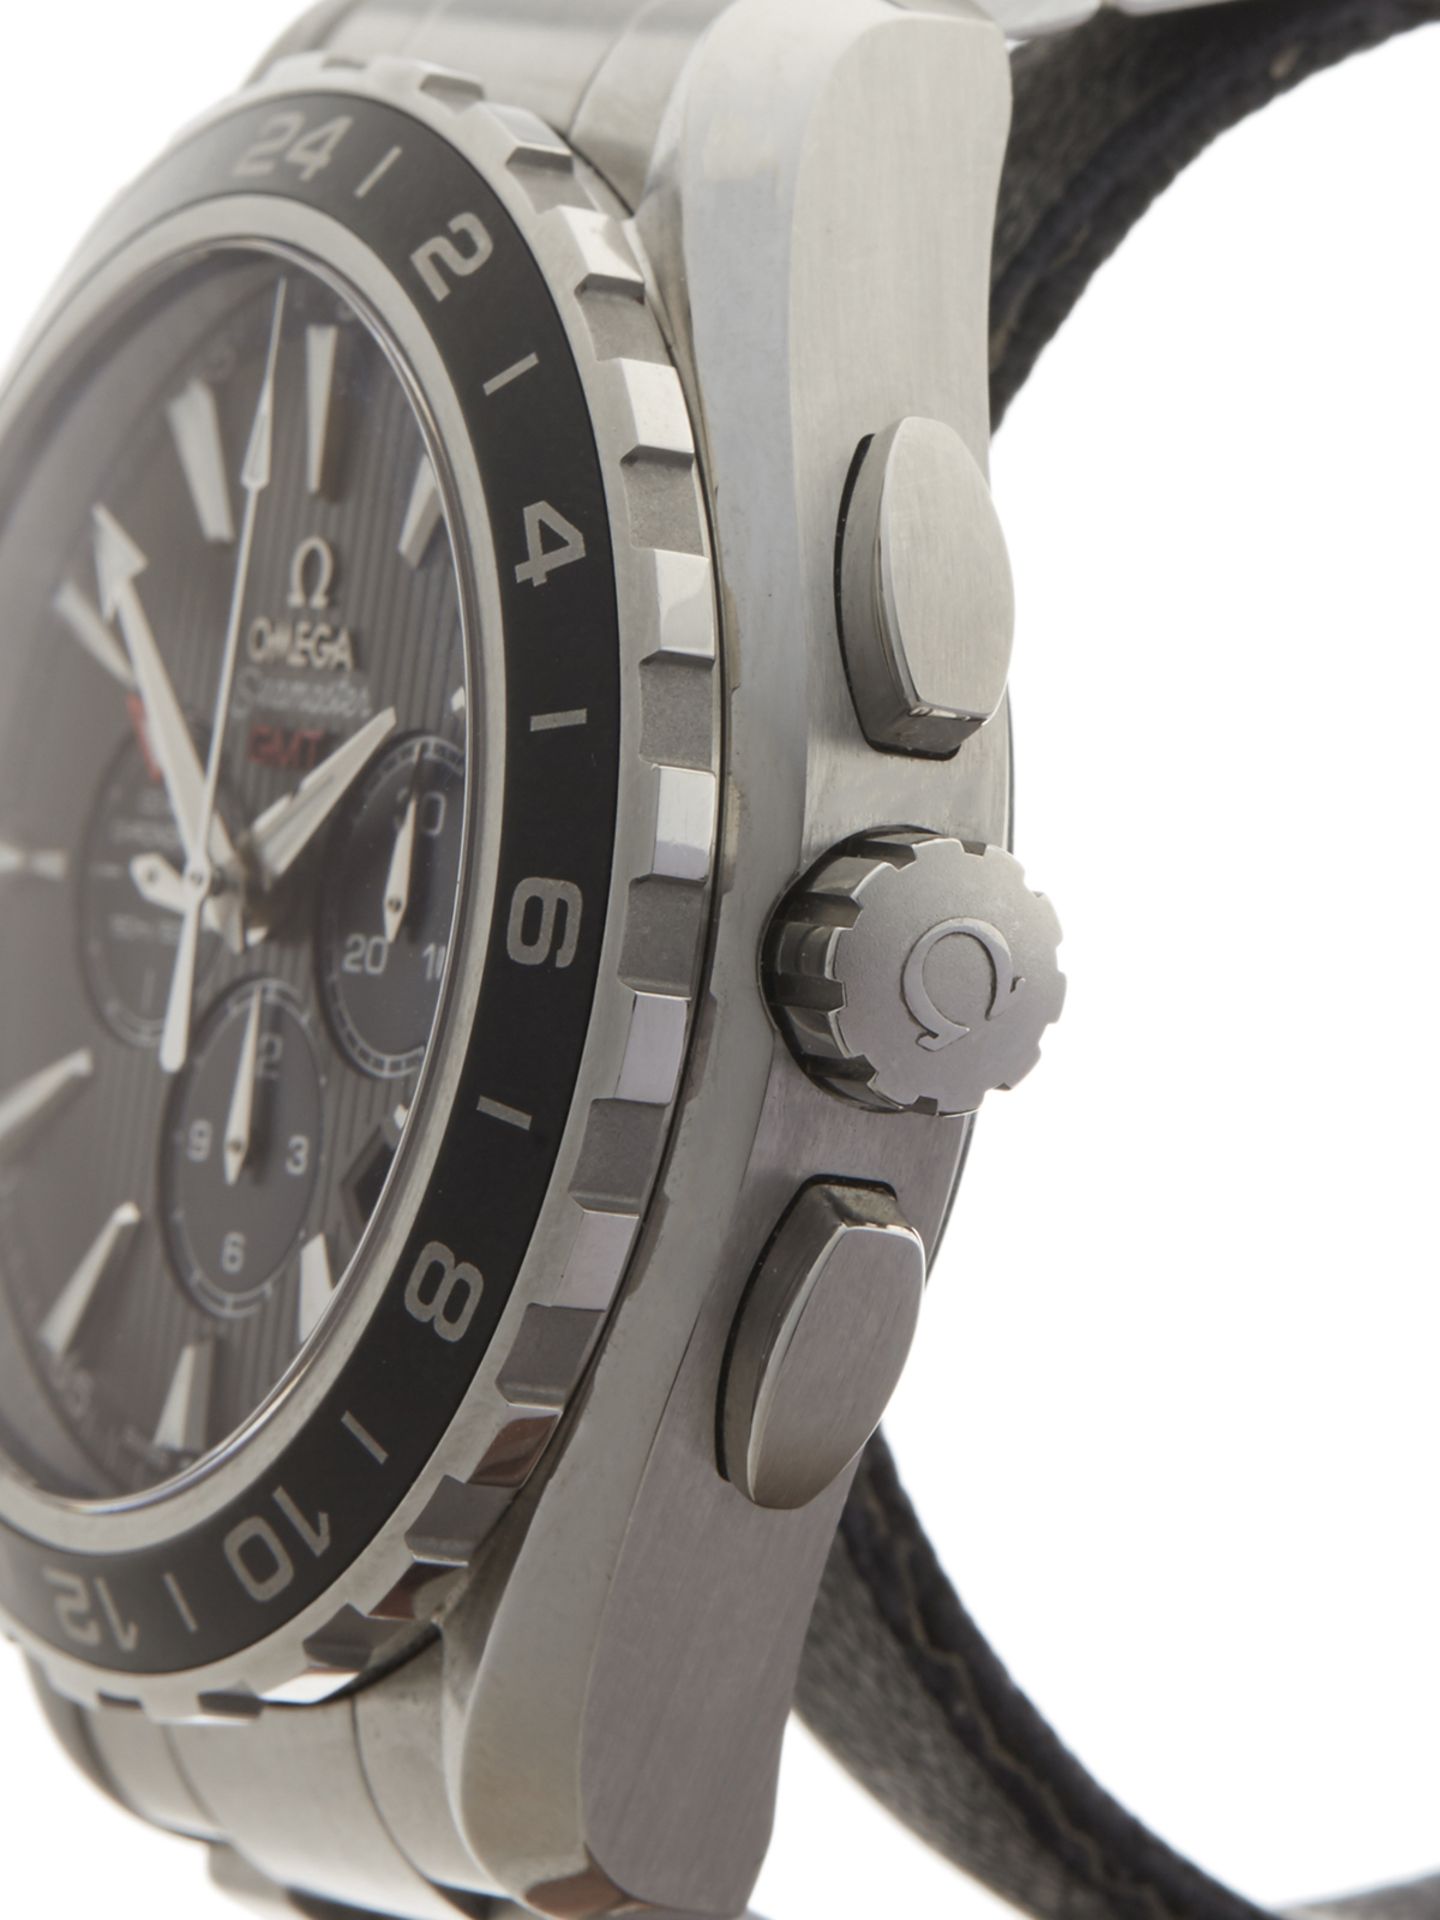 Omega Seamaster Aqua Terra GMT Chronograph 44mm Stainless Steel 231.13.44.52.06.001 - Image 4 of 9